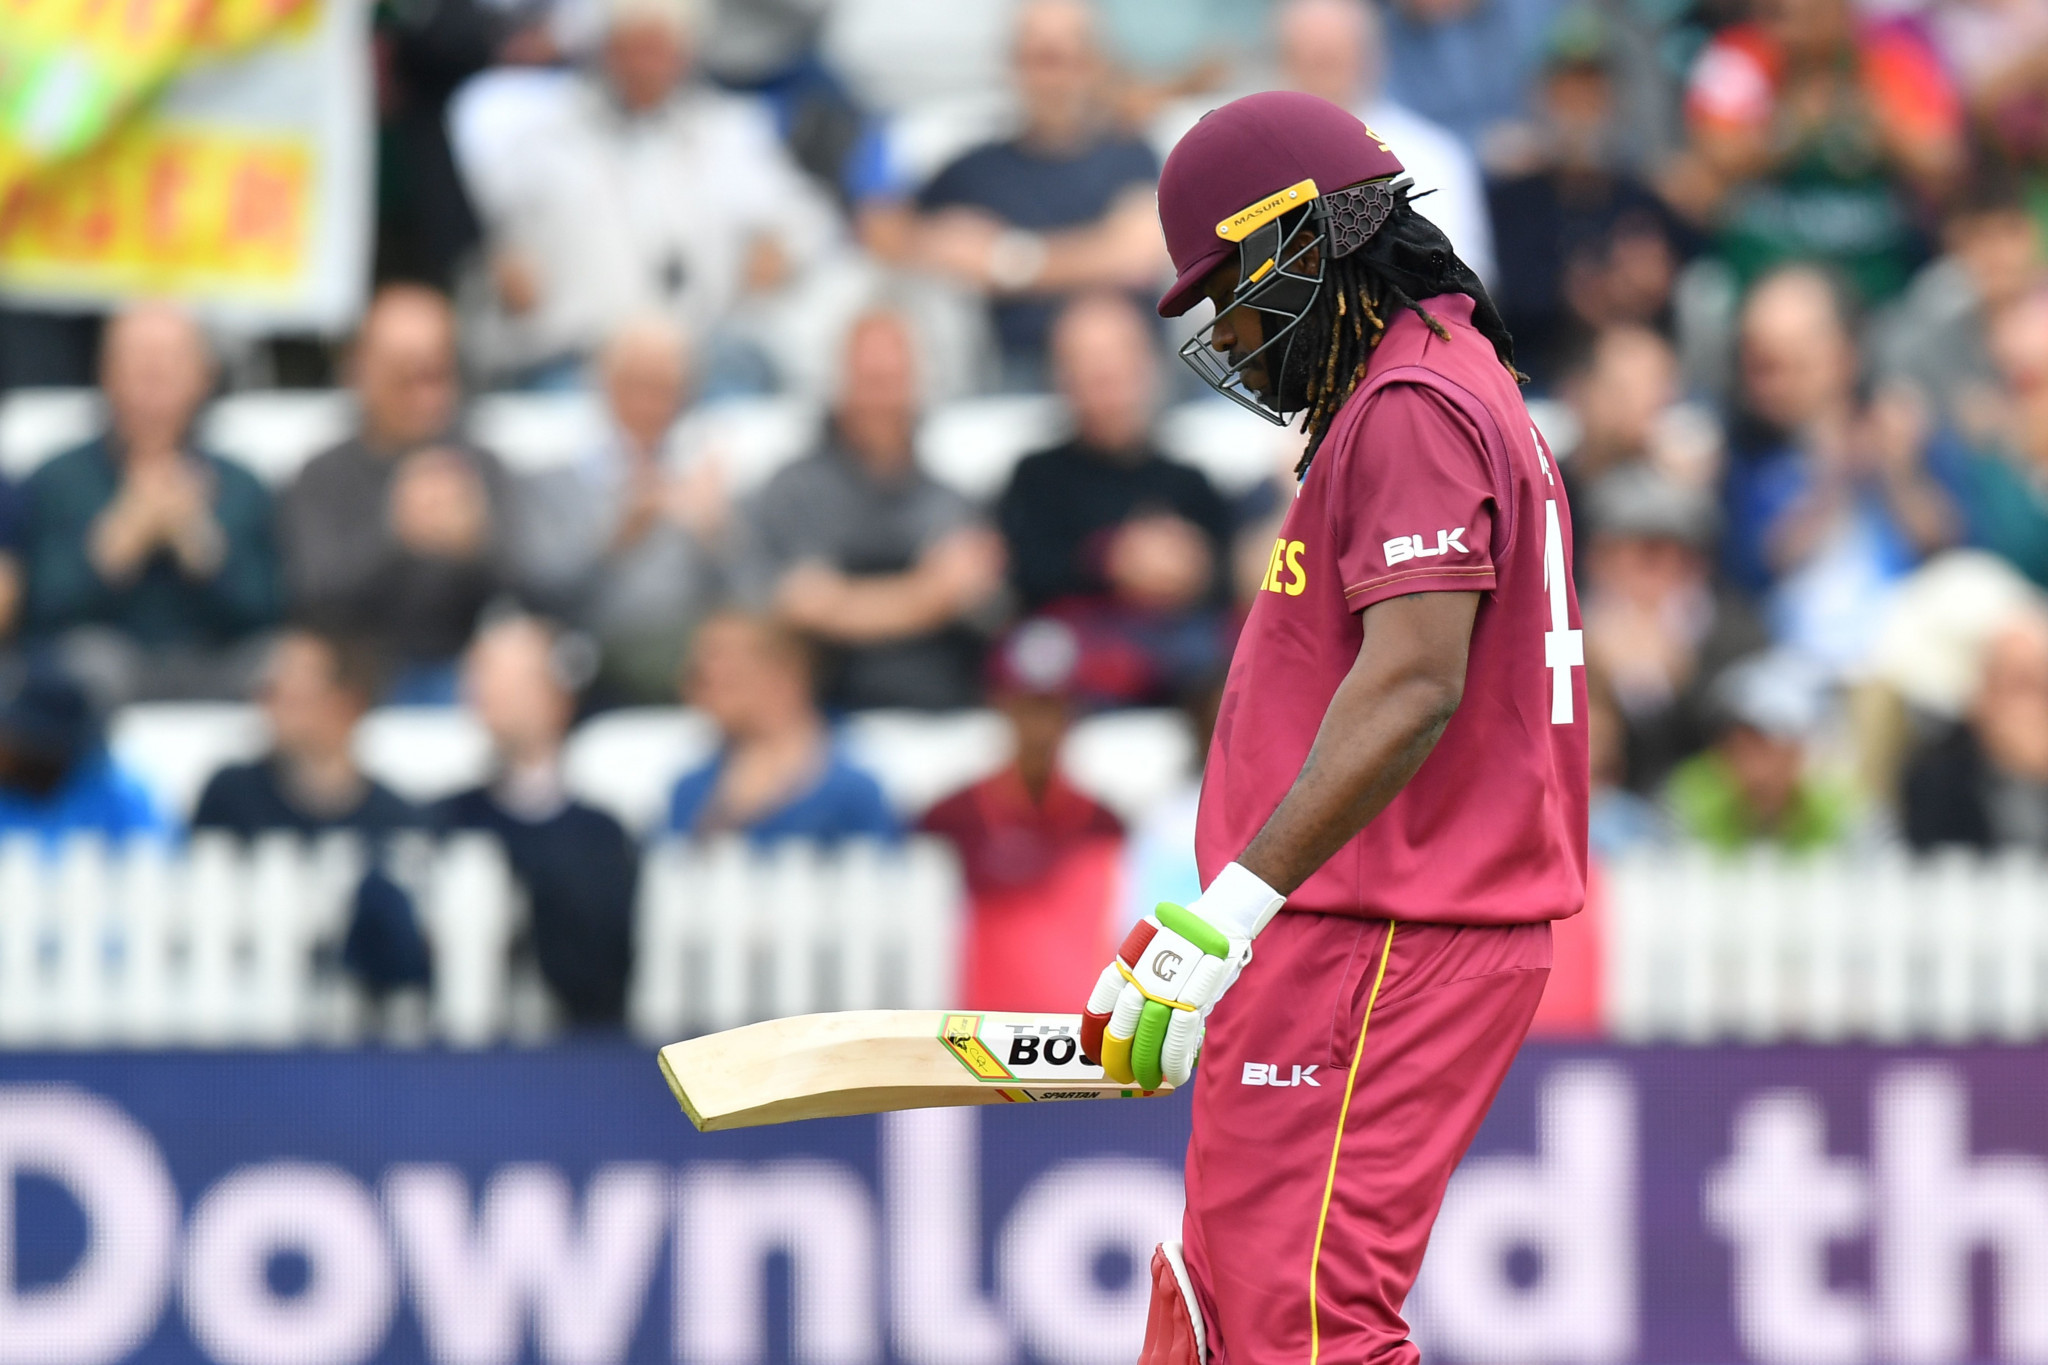 West Indies made 321-8, their fourth-highest World Cup score, despite opener Chris Gayle getting out for a 13-ball duck ©Getty Images